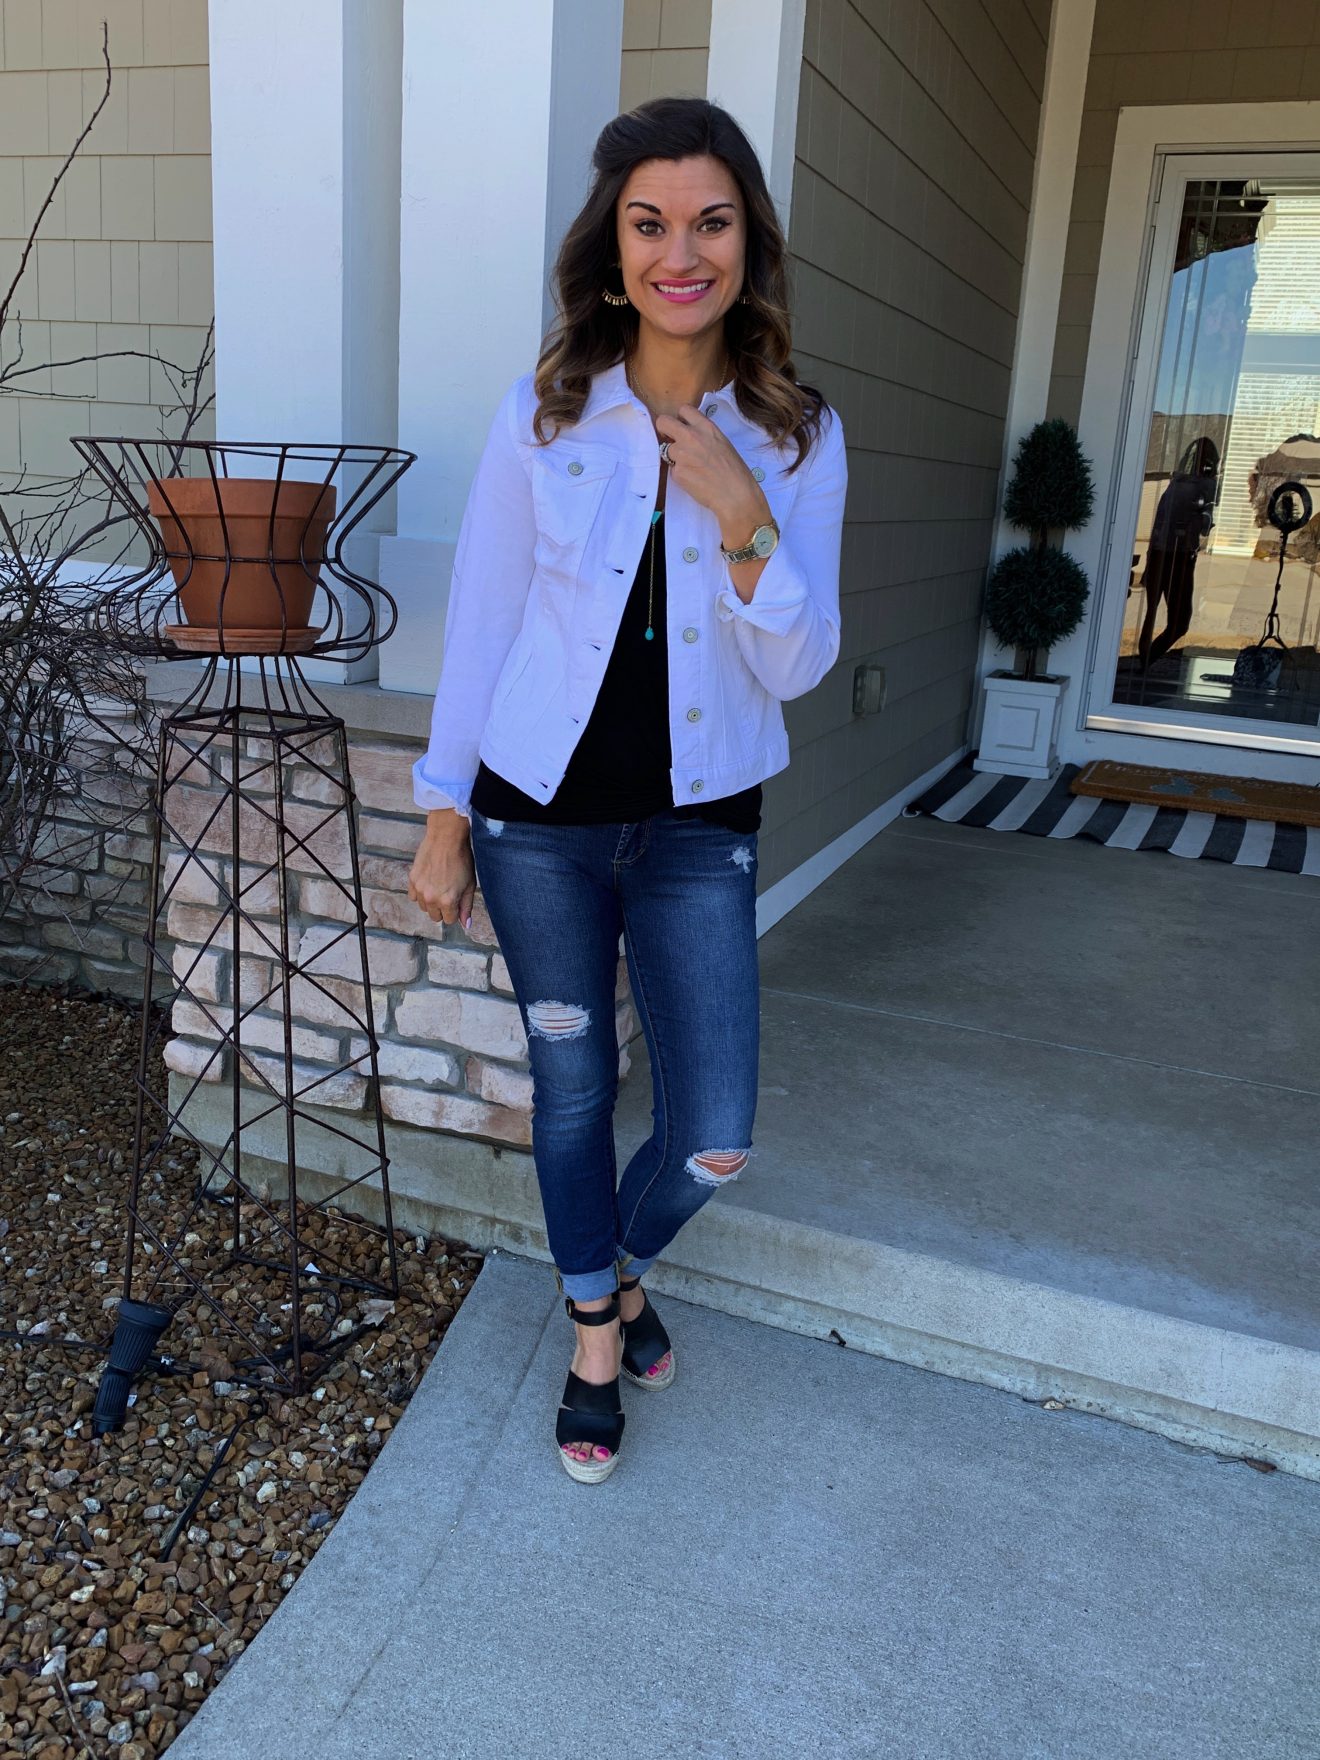 How to Wear One White Jacket Twelve Ways – Just Posted